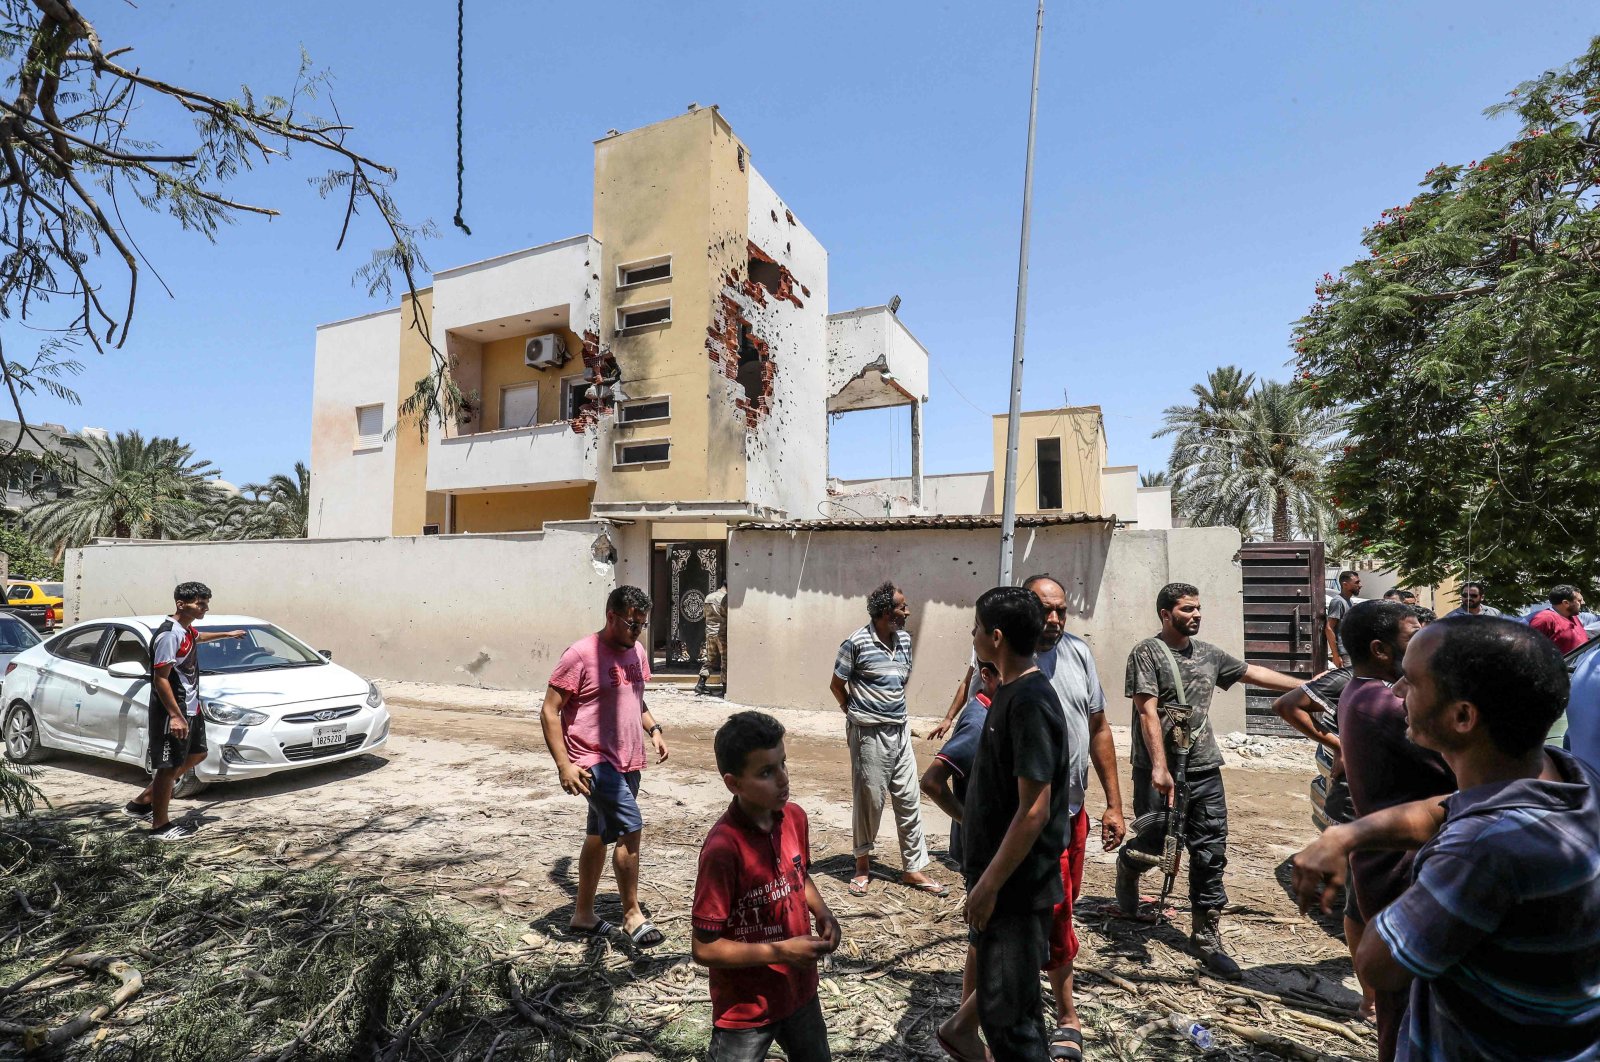 People assess the damage caused by recent fighting between armed groups in a neighborhood of the capital Tripoli, Libya, July 23, 2022. (AFP Photo)